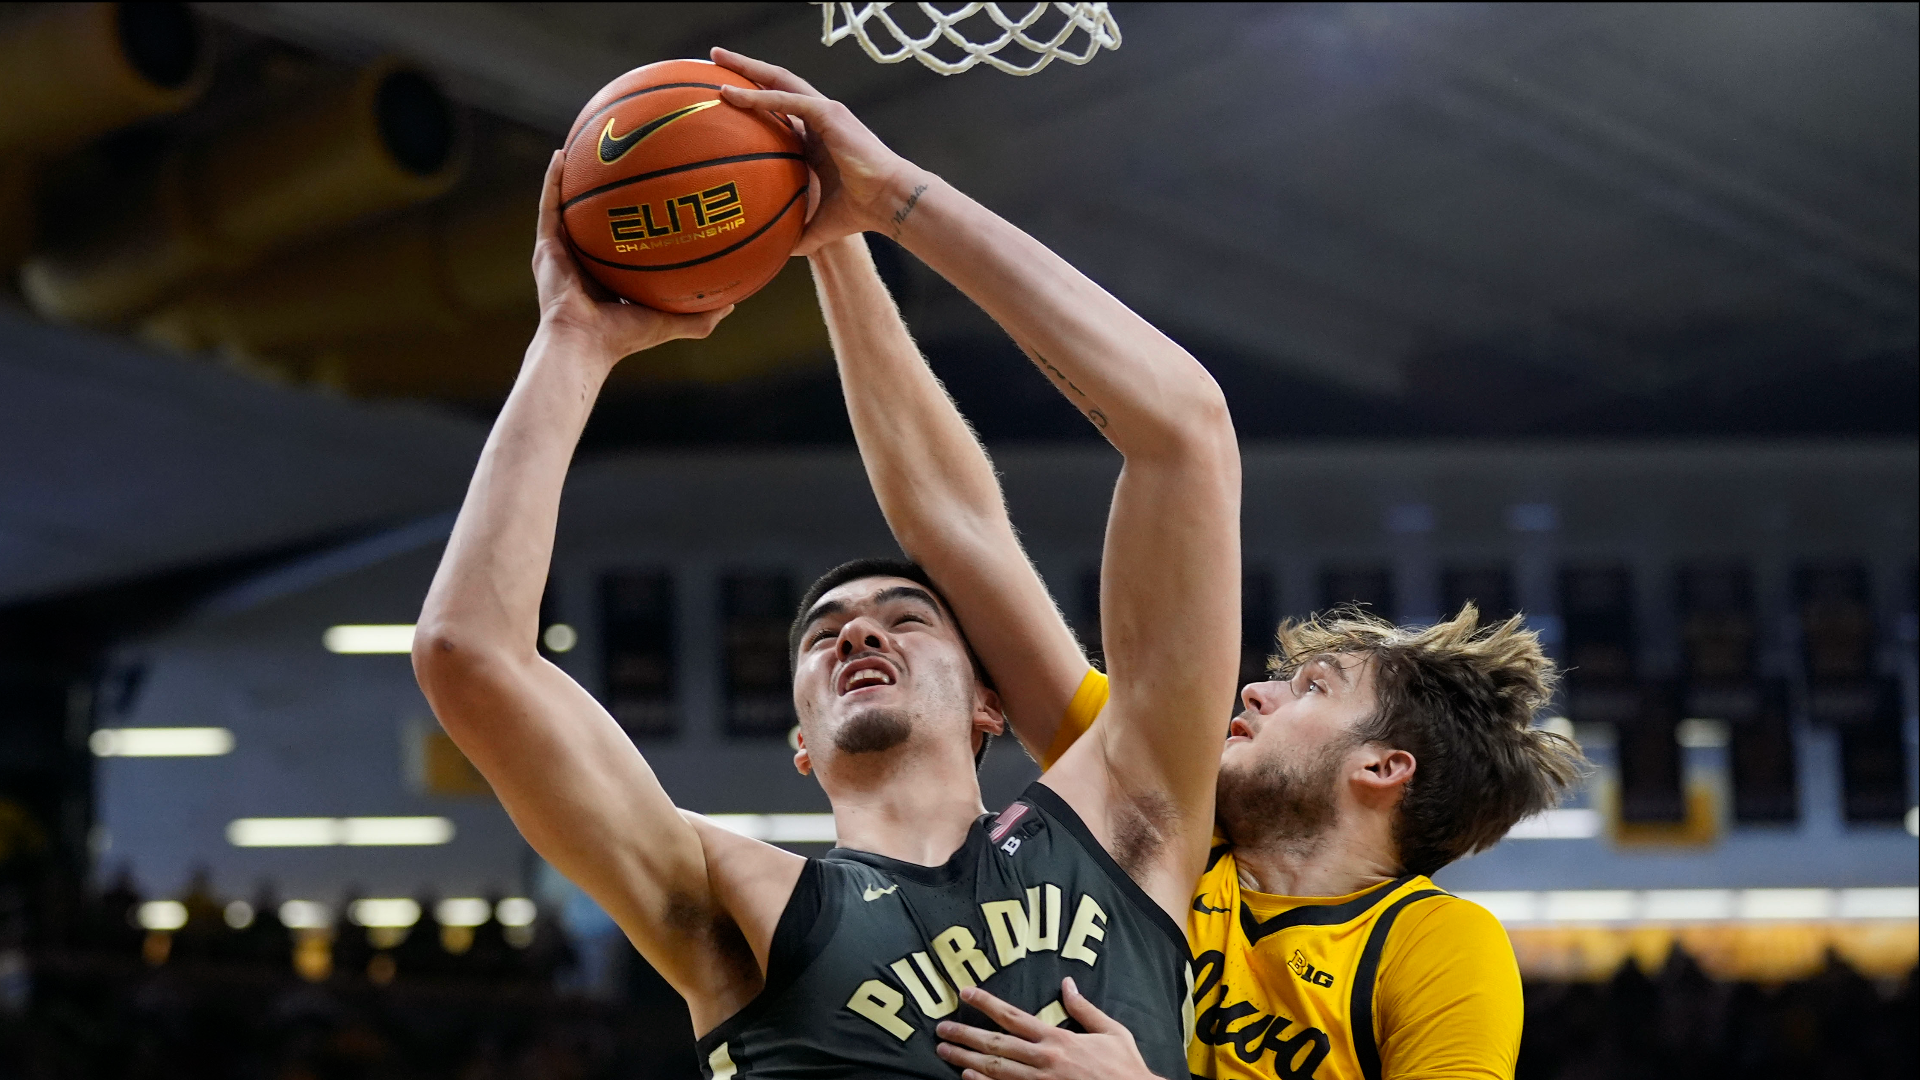 The Hawkeyes came in having won three consecutive games and six of their last seven, but their inability to get rebounds proved costly.